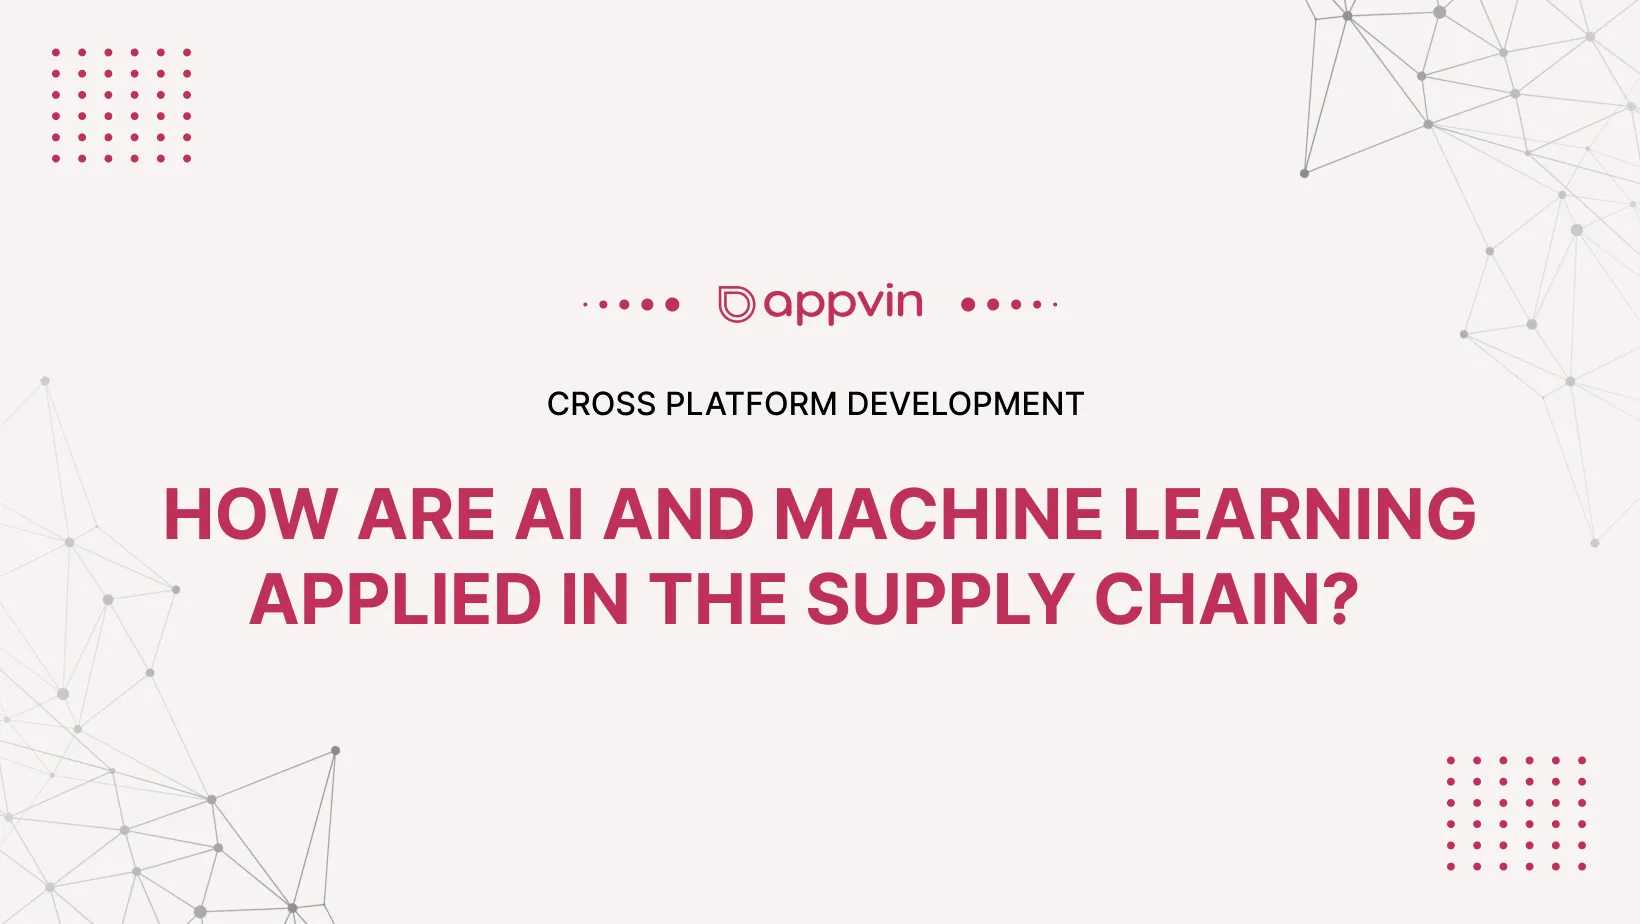 How are AI and machine learning applied in the supply chain? 